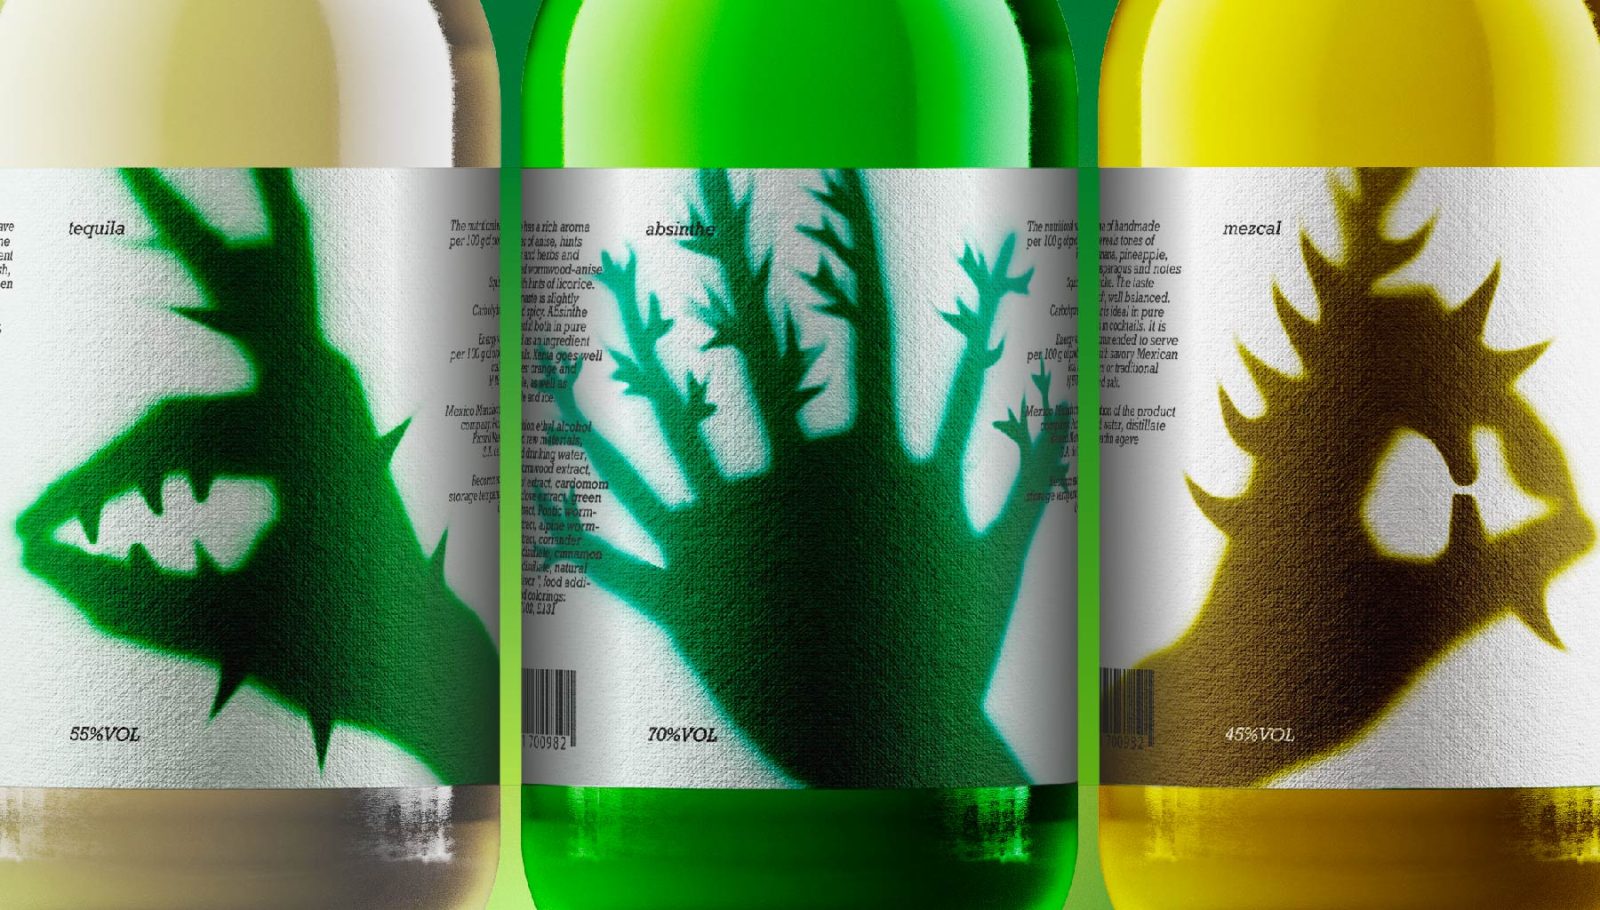 Student Packaging Design Concept for A Series of Alcoholic Drinks Based on Plant Extracts